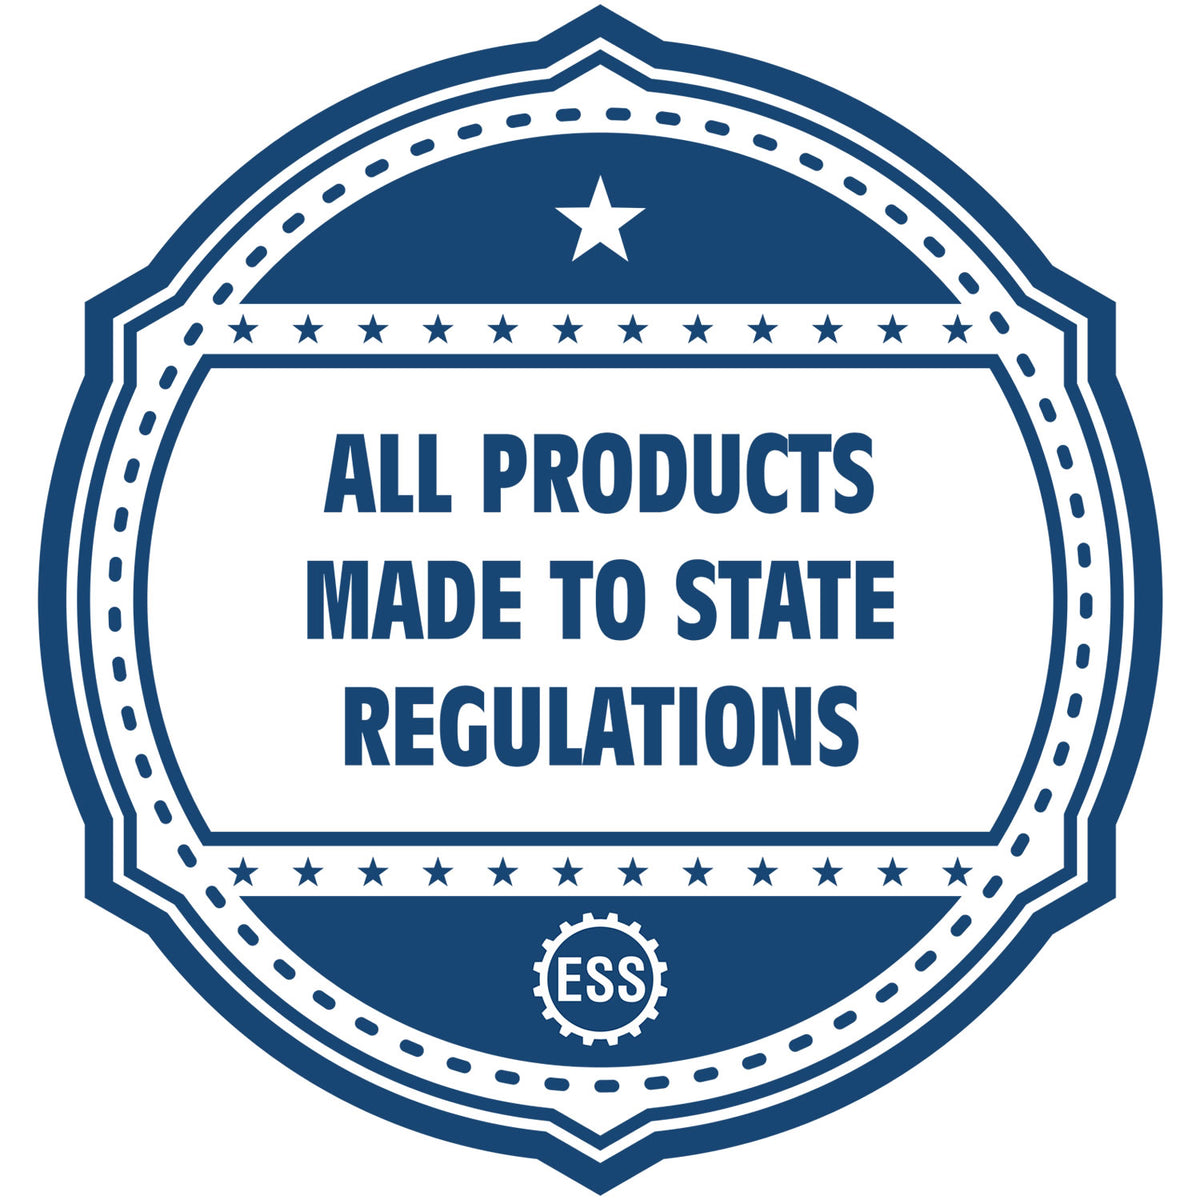 An icon or badge element for the MaxLight Premium Pre-Inked Maryland Rectangular Notarial Stamp showing that this product is made in compliance with state regulations.